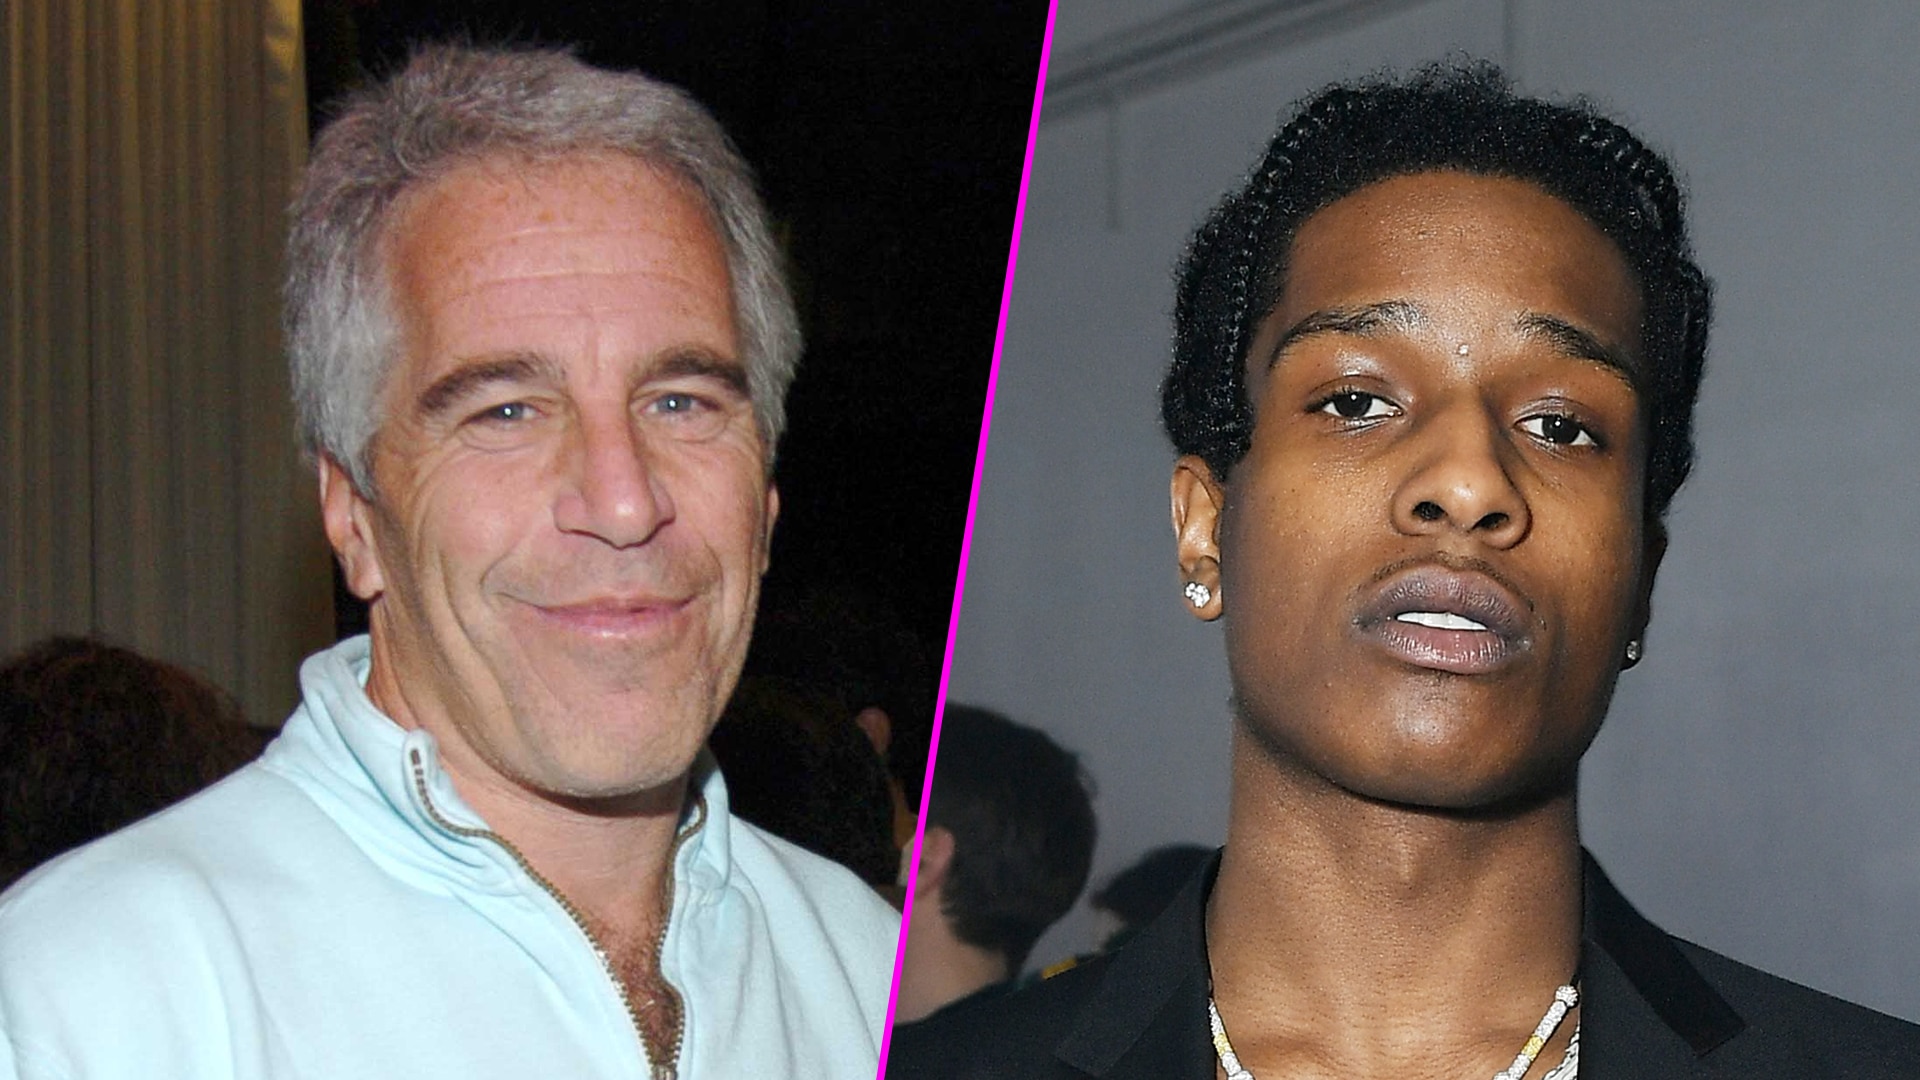 Watch Access Hollywood Highlight From Jeffrey Epstein To ASAP Rocky